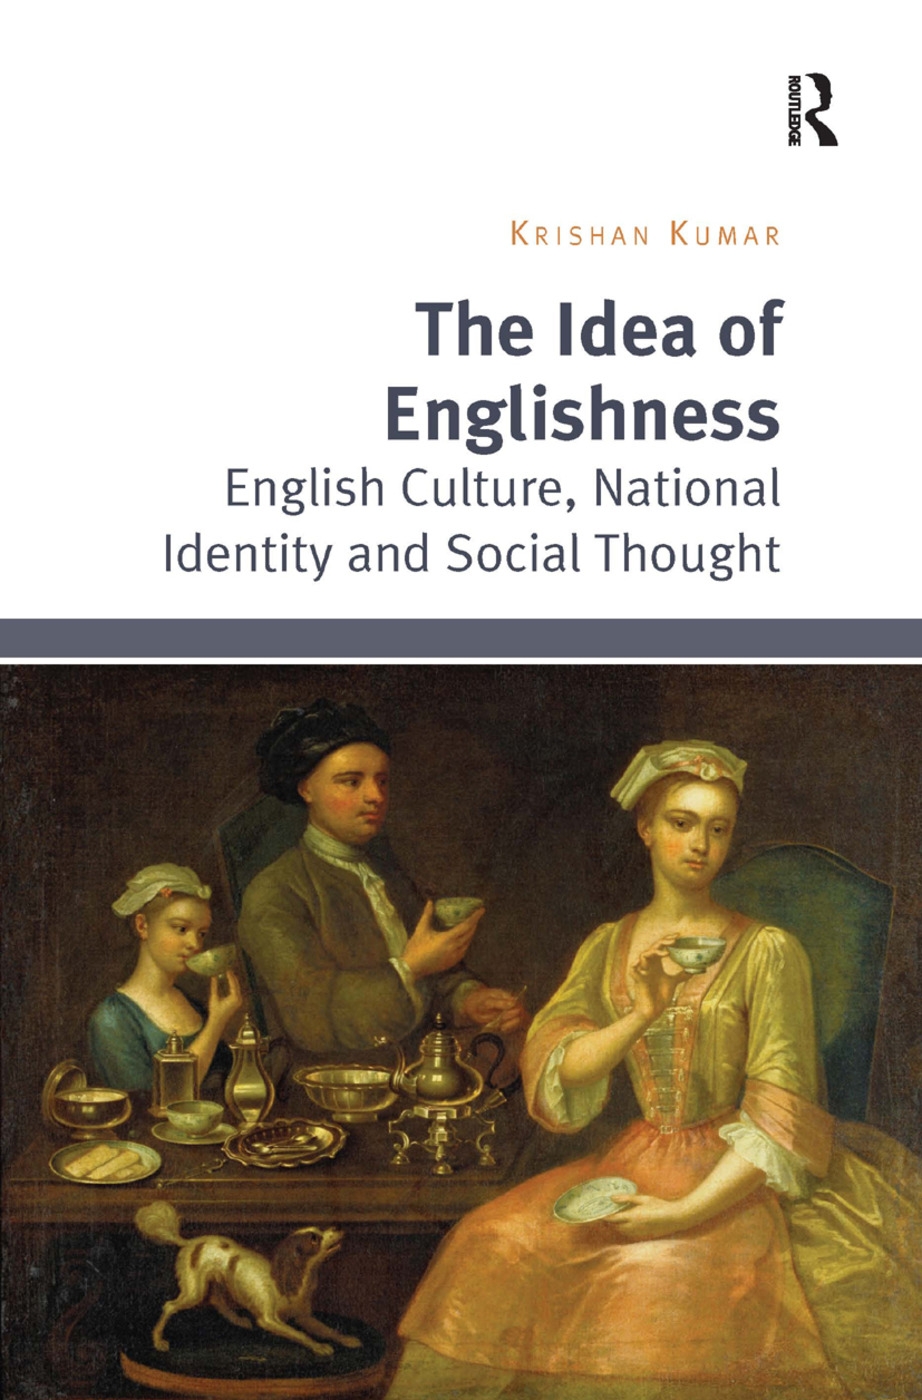 The Idea of Englishness: English Culture, National Identity and Social Thought